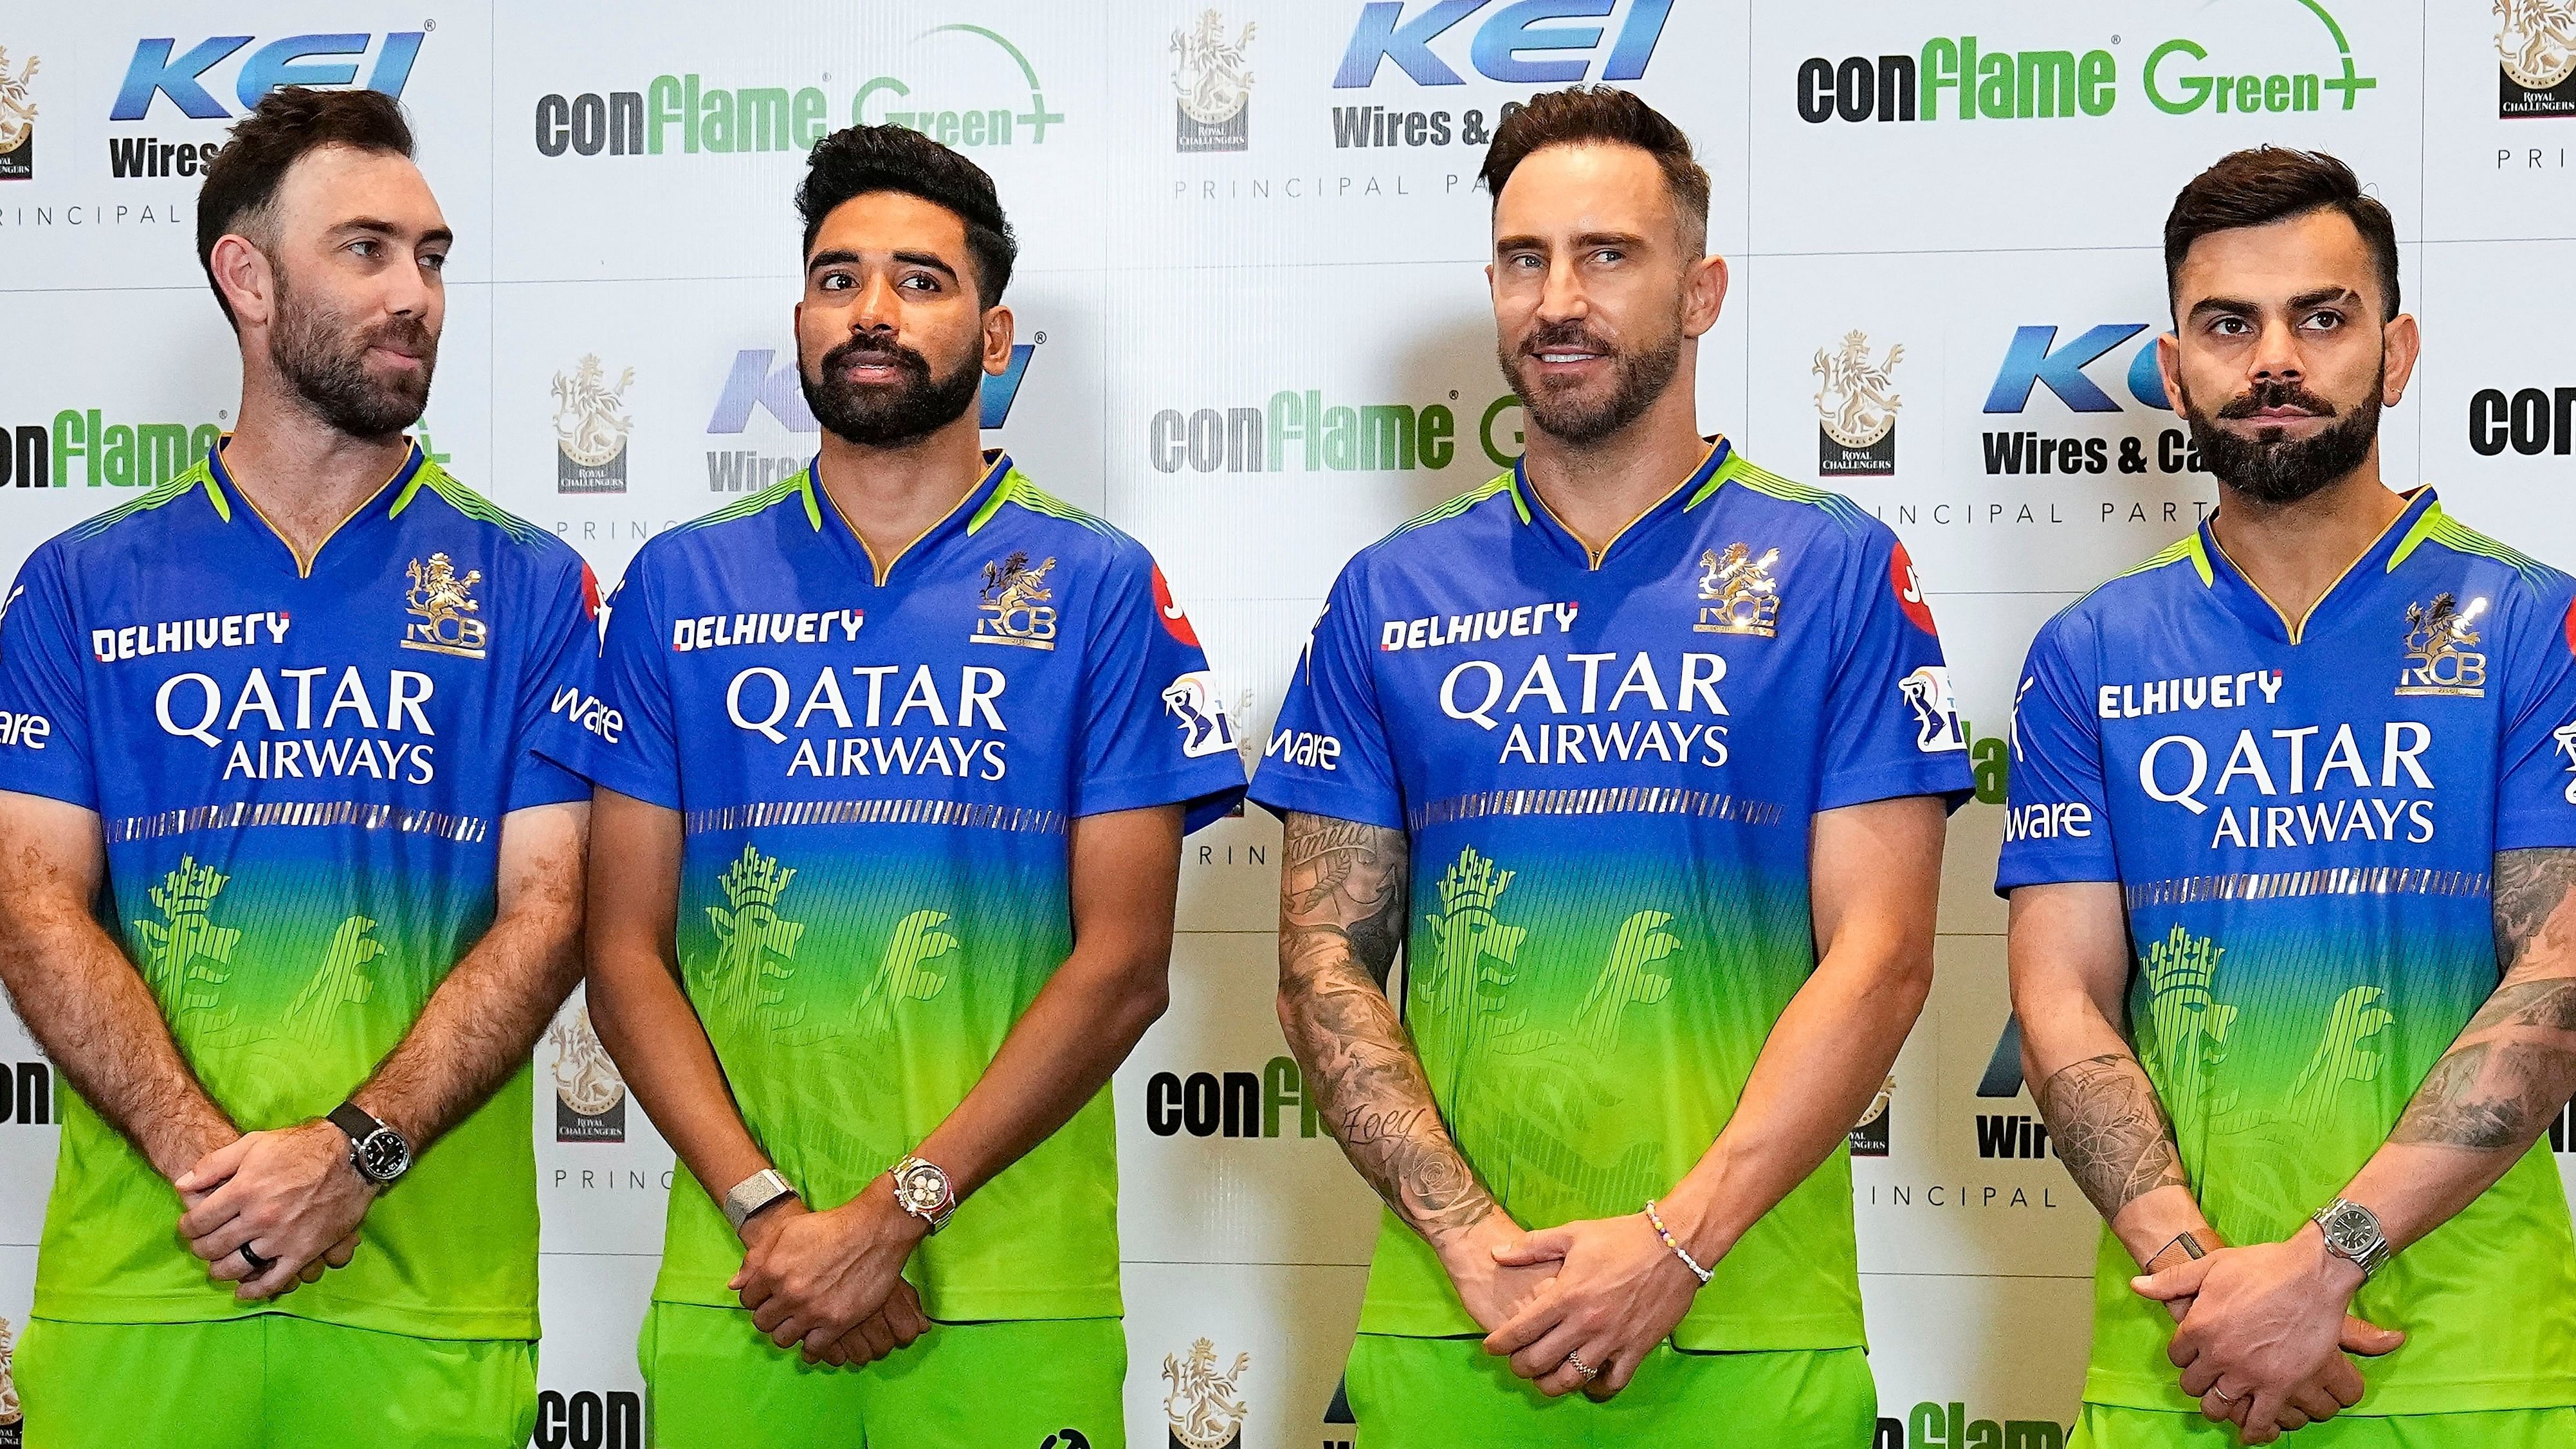 <div class="paragraphs"><p>Royal Challengers Bengaluru captain Faf du Plessis (second from right) with teammates Virat Kohli (right), Mohammed Siraj (second from left) and Glenn Maxwell during the launch of team’s green jersey as part of their 'Go Green Initiative' which enabled them to restore 3 lakes in a water-stressed Bengaluru.&nbsp;</p></div>